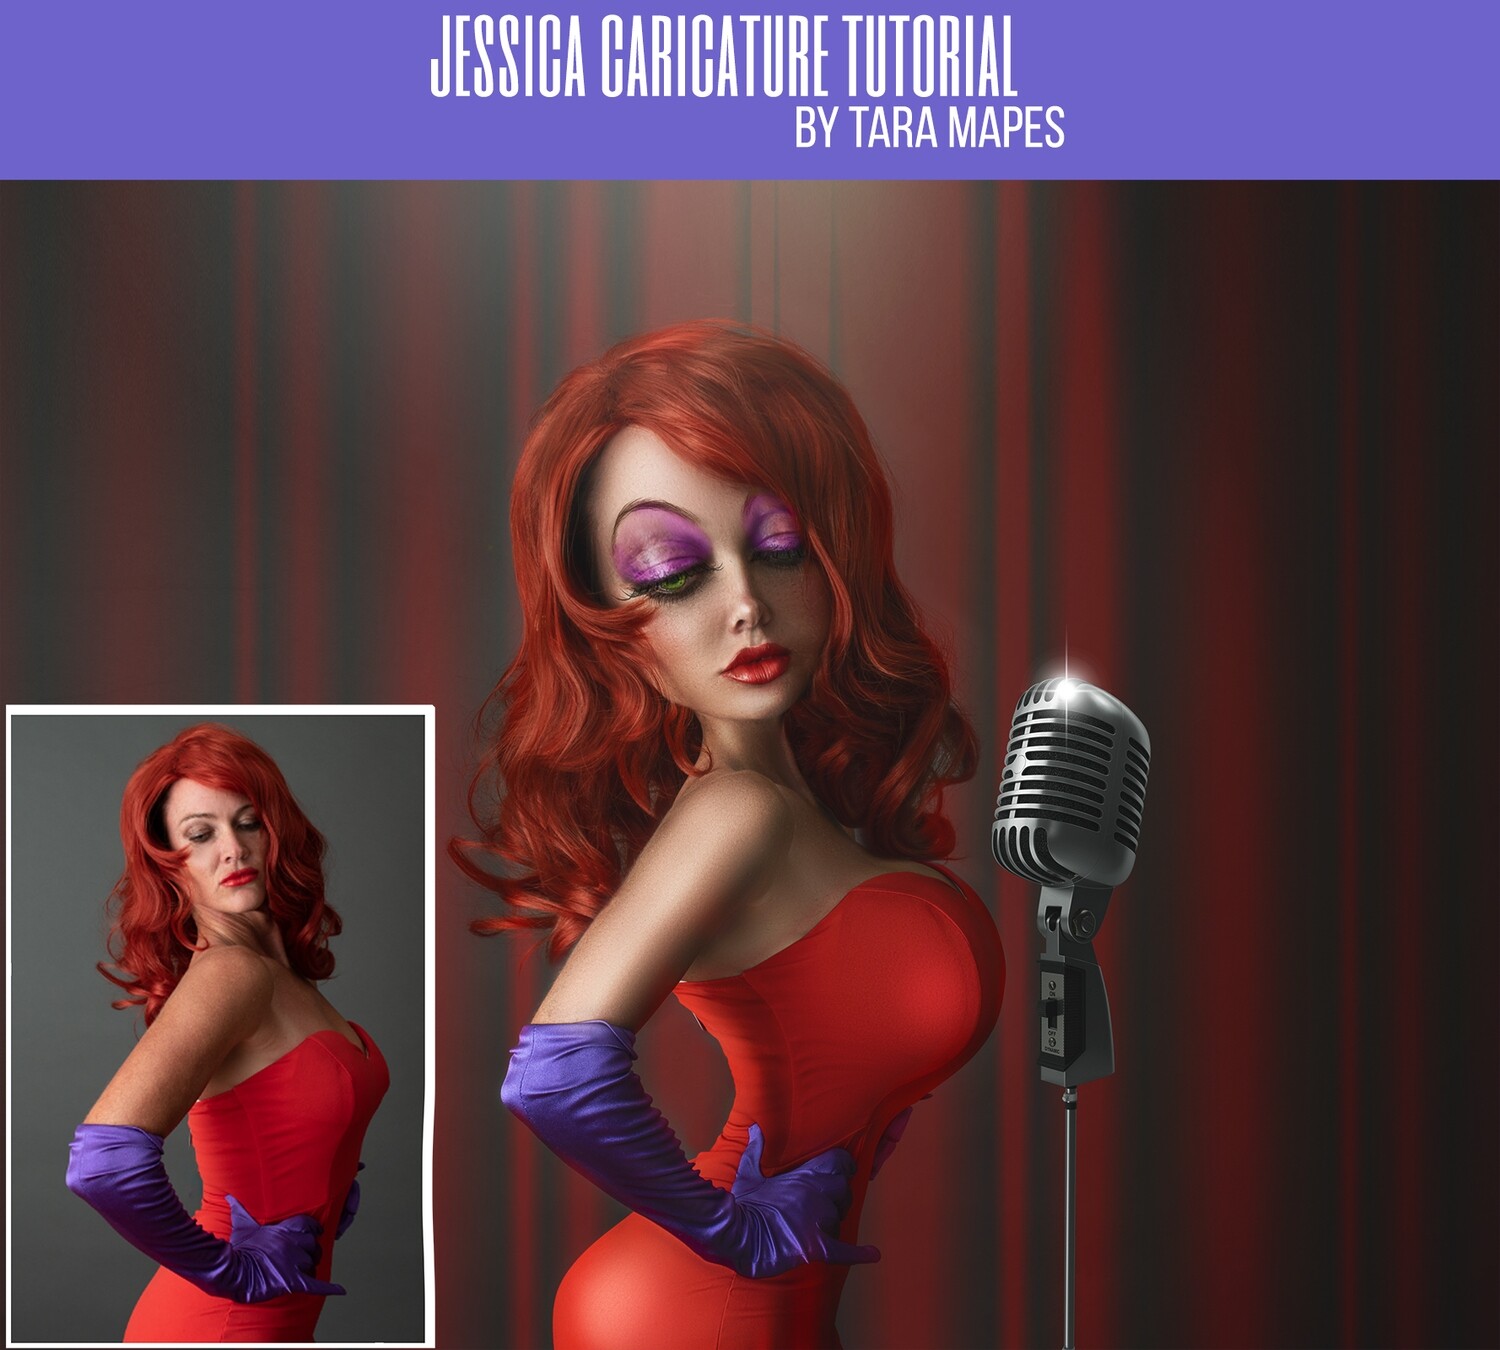 Jessica Caricature Tutorial by Tara Mapes - Photomanipulation and Surreal Editing Tutorial